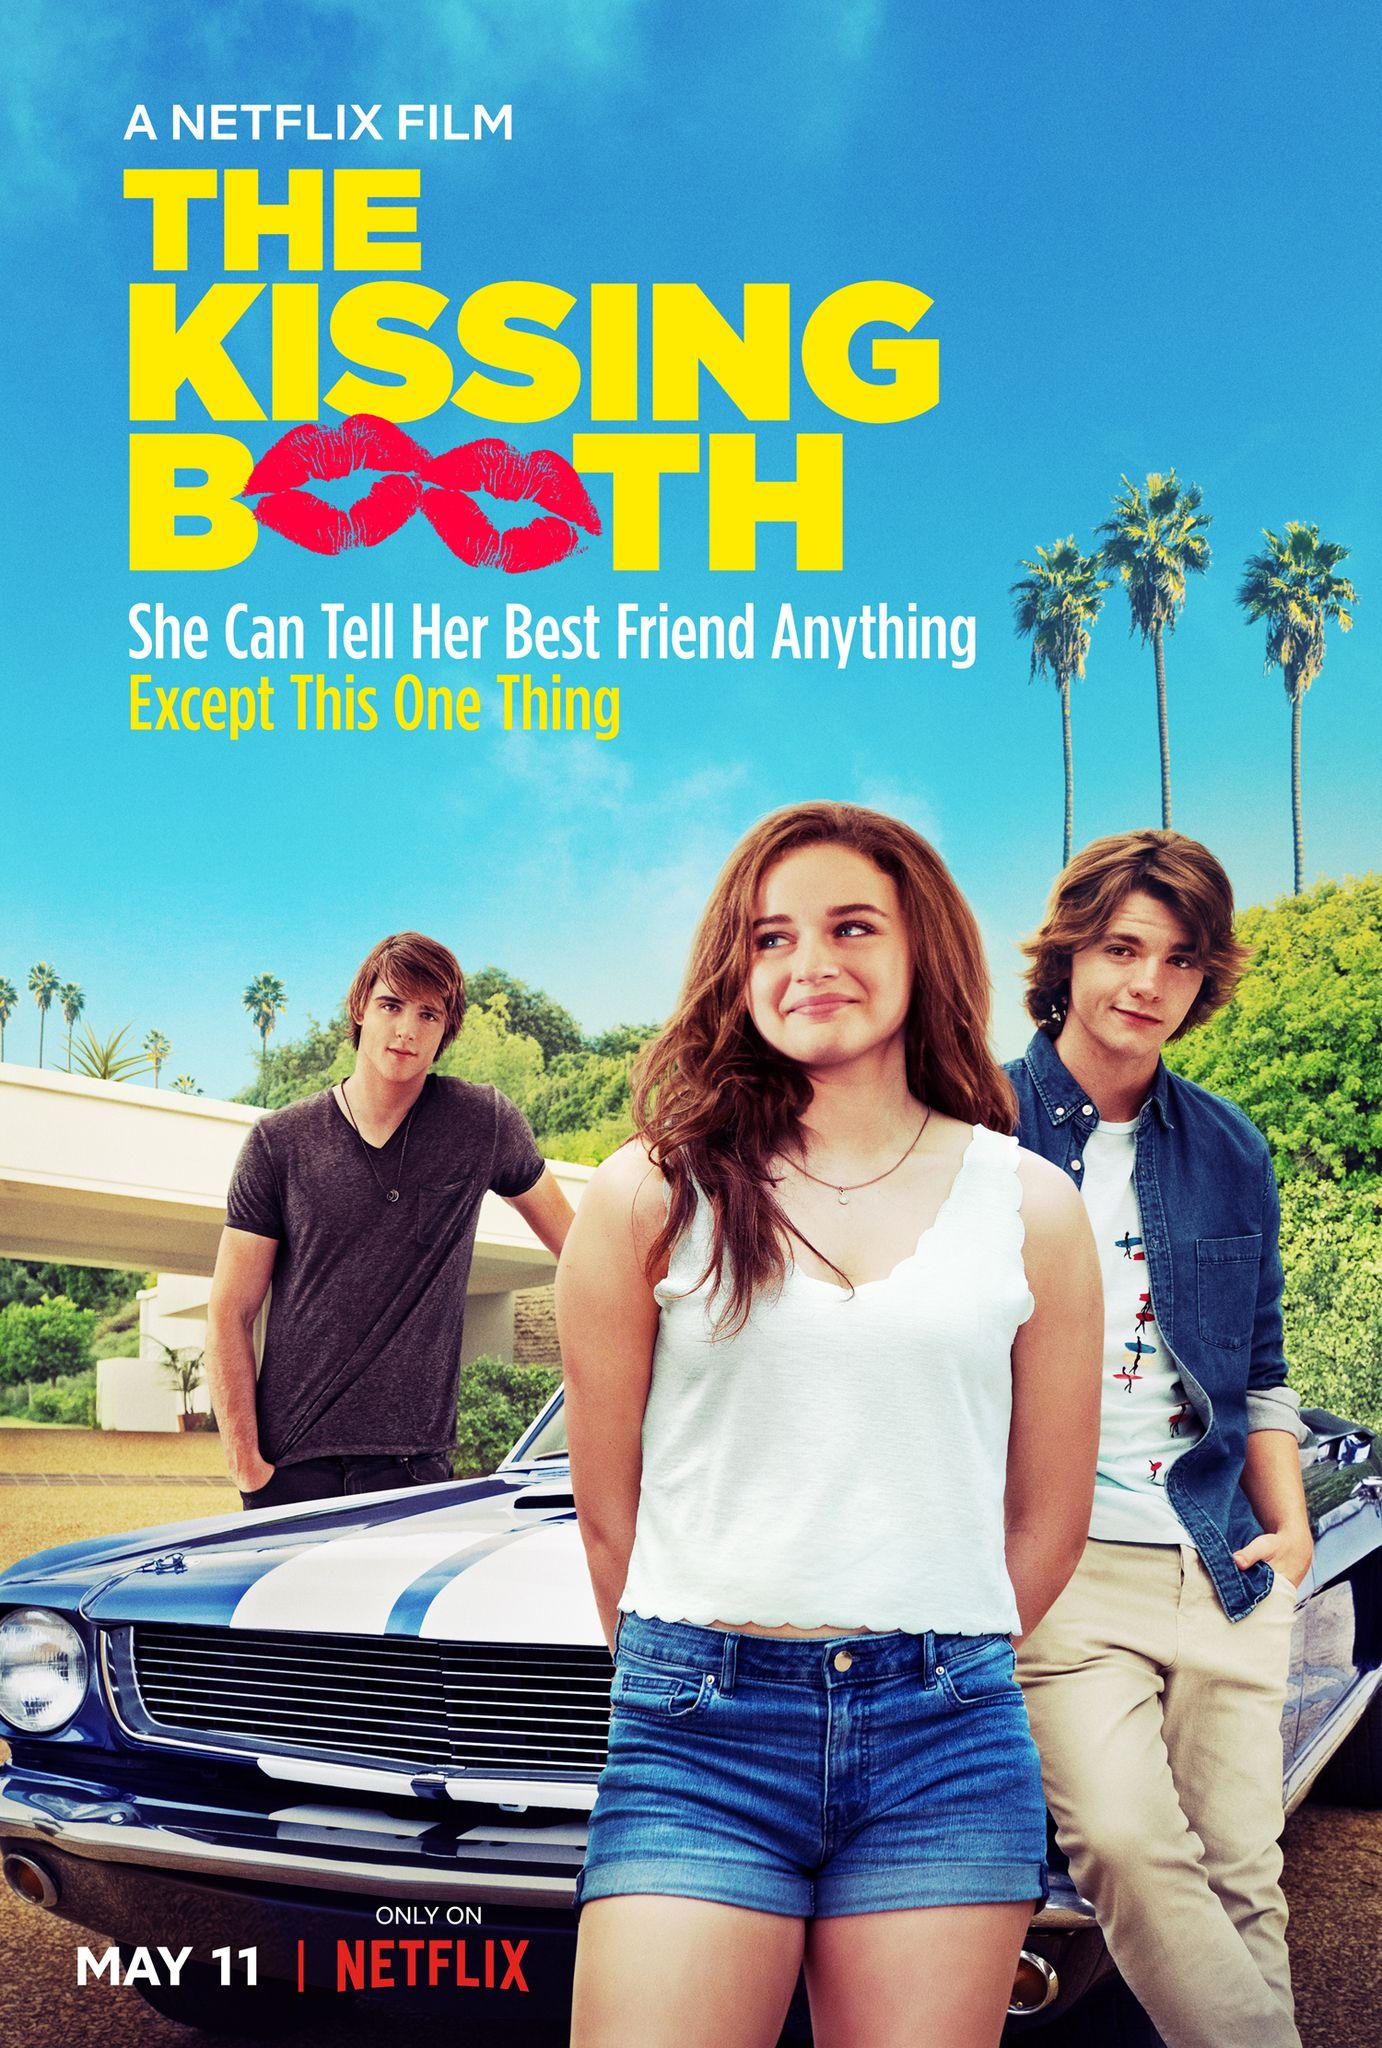 The Kissing Booth 2': Release date, cast, plot and everything you